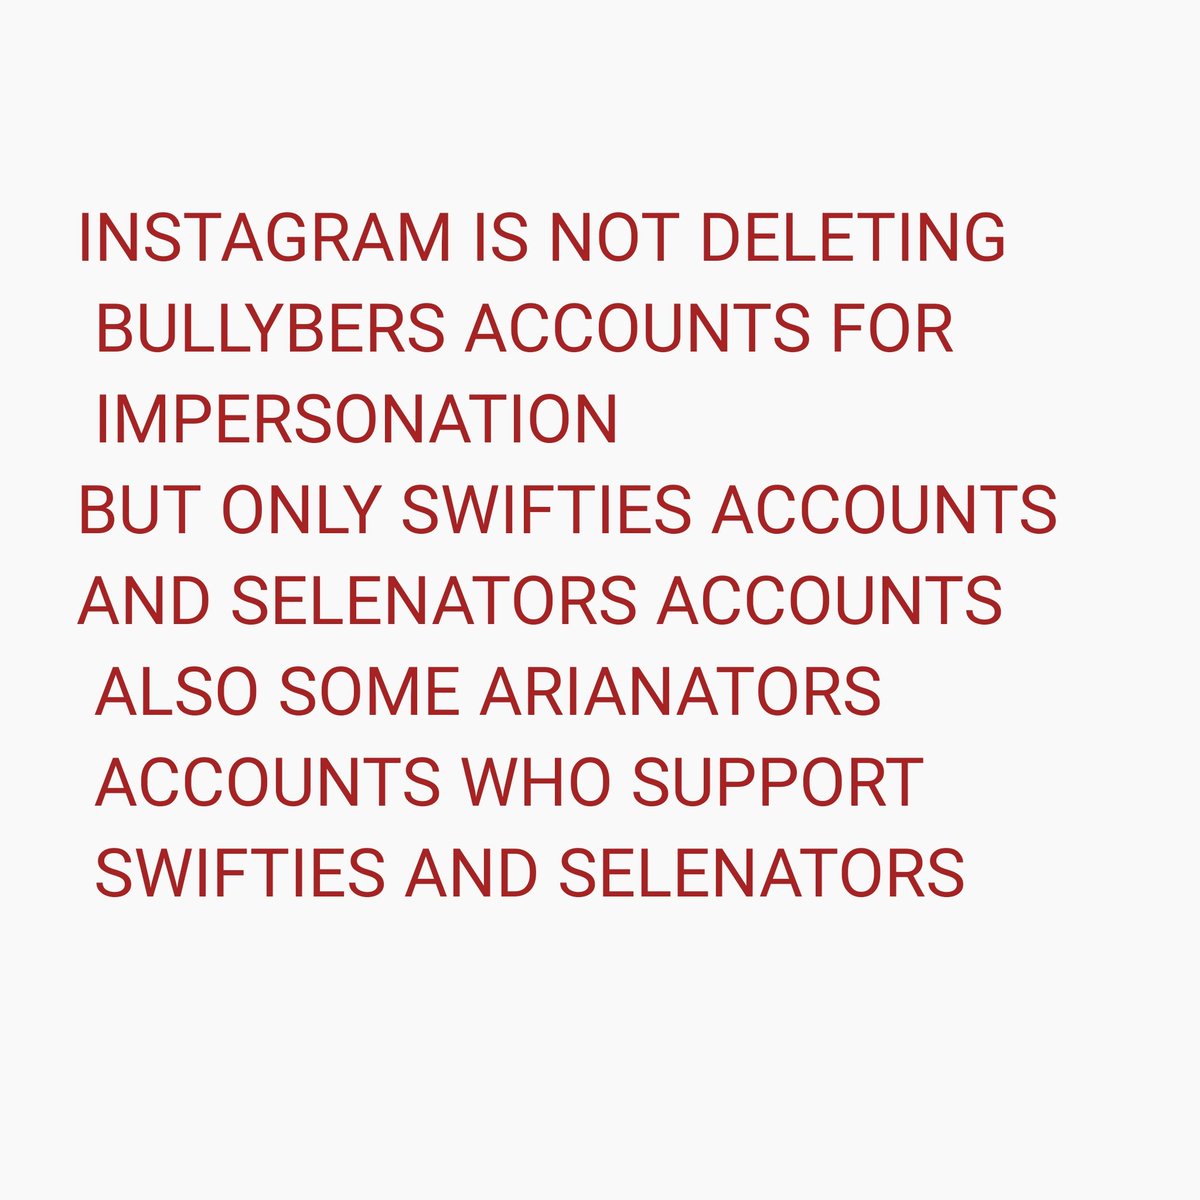 How insta is so partial against SWIFTIEs accounts I might sound crazy but it's true